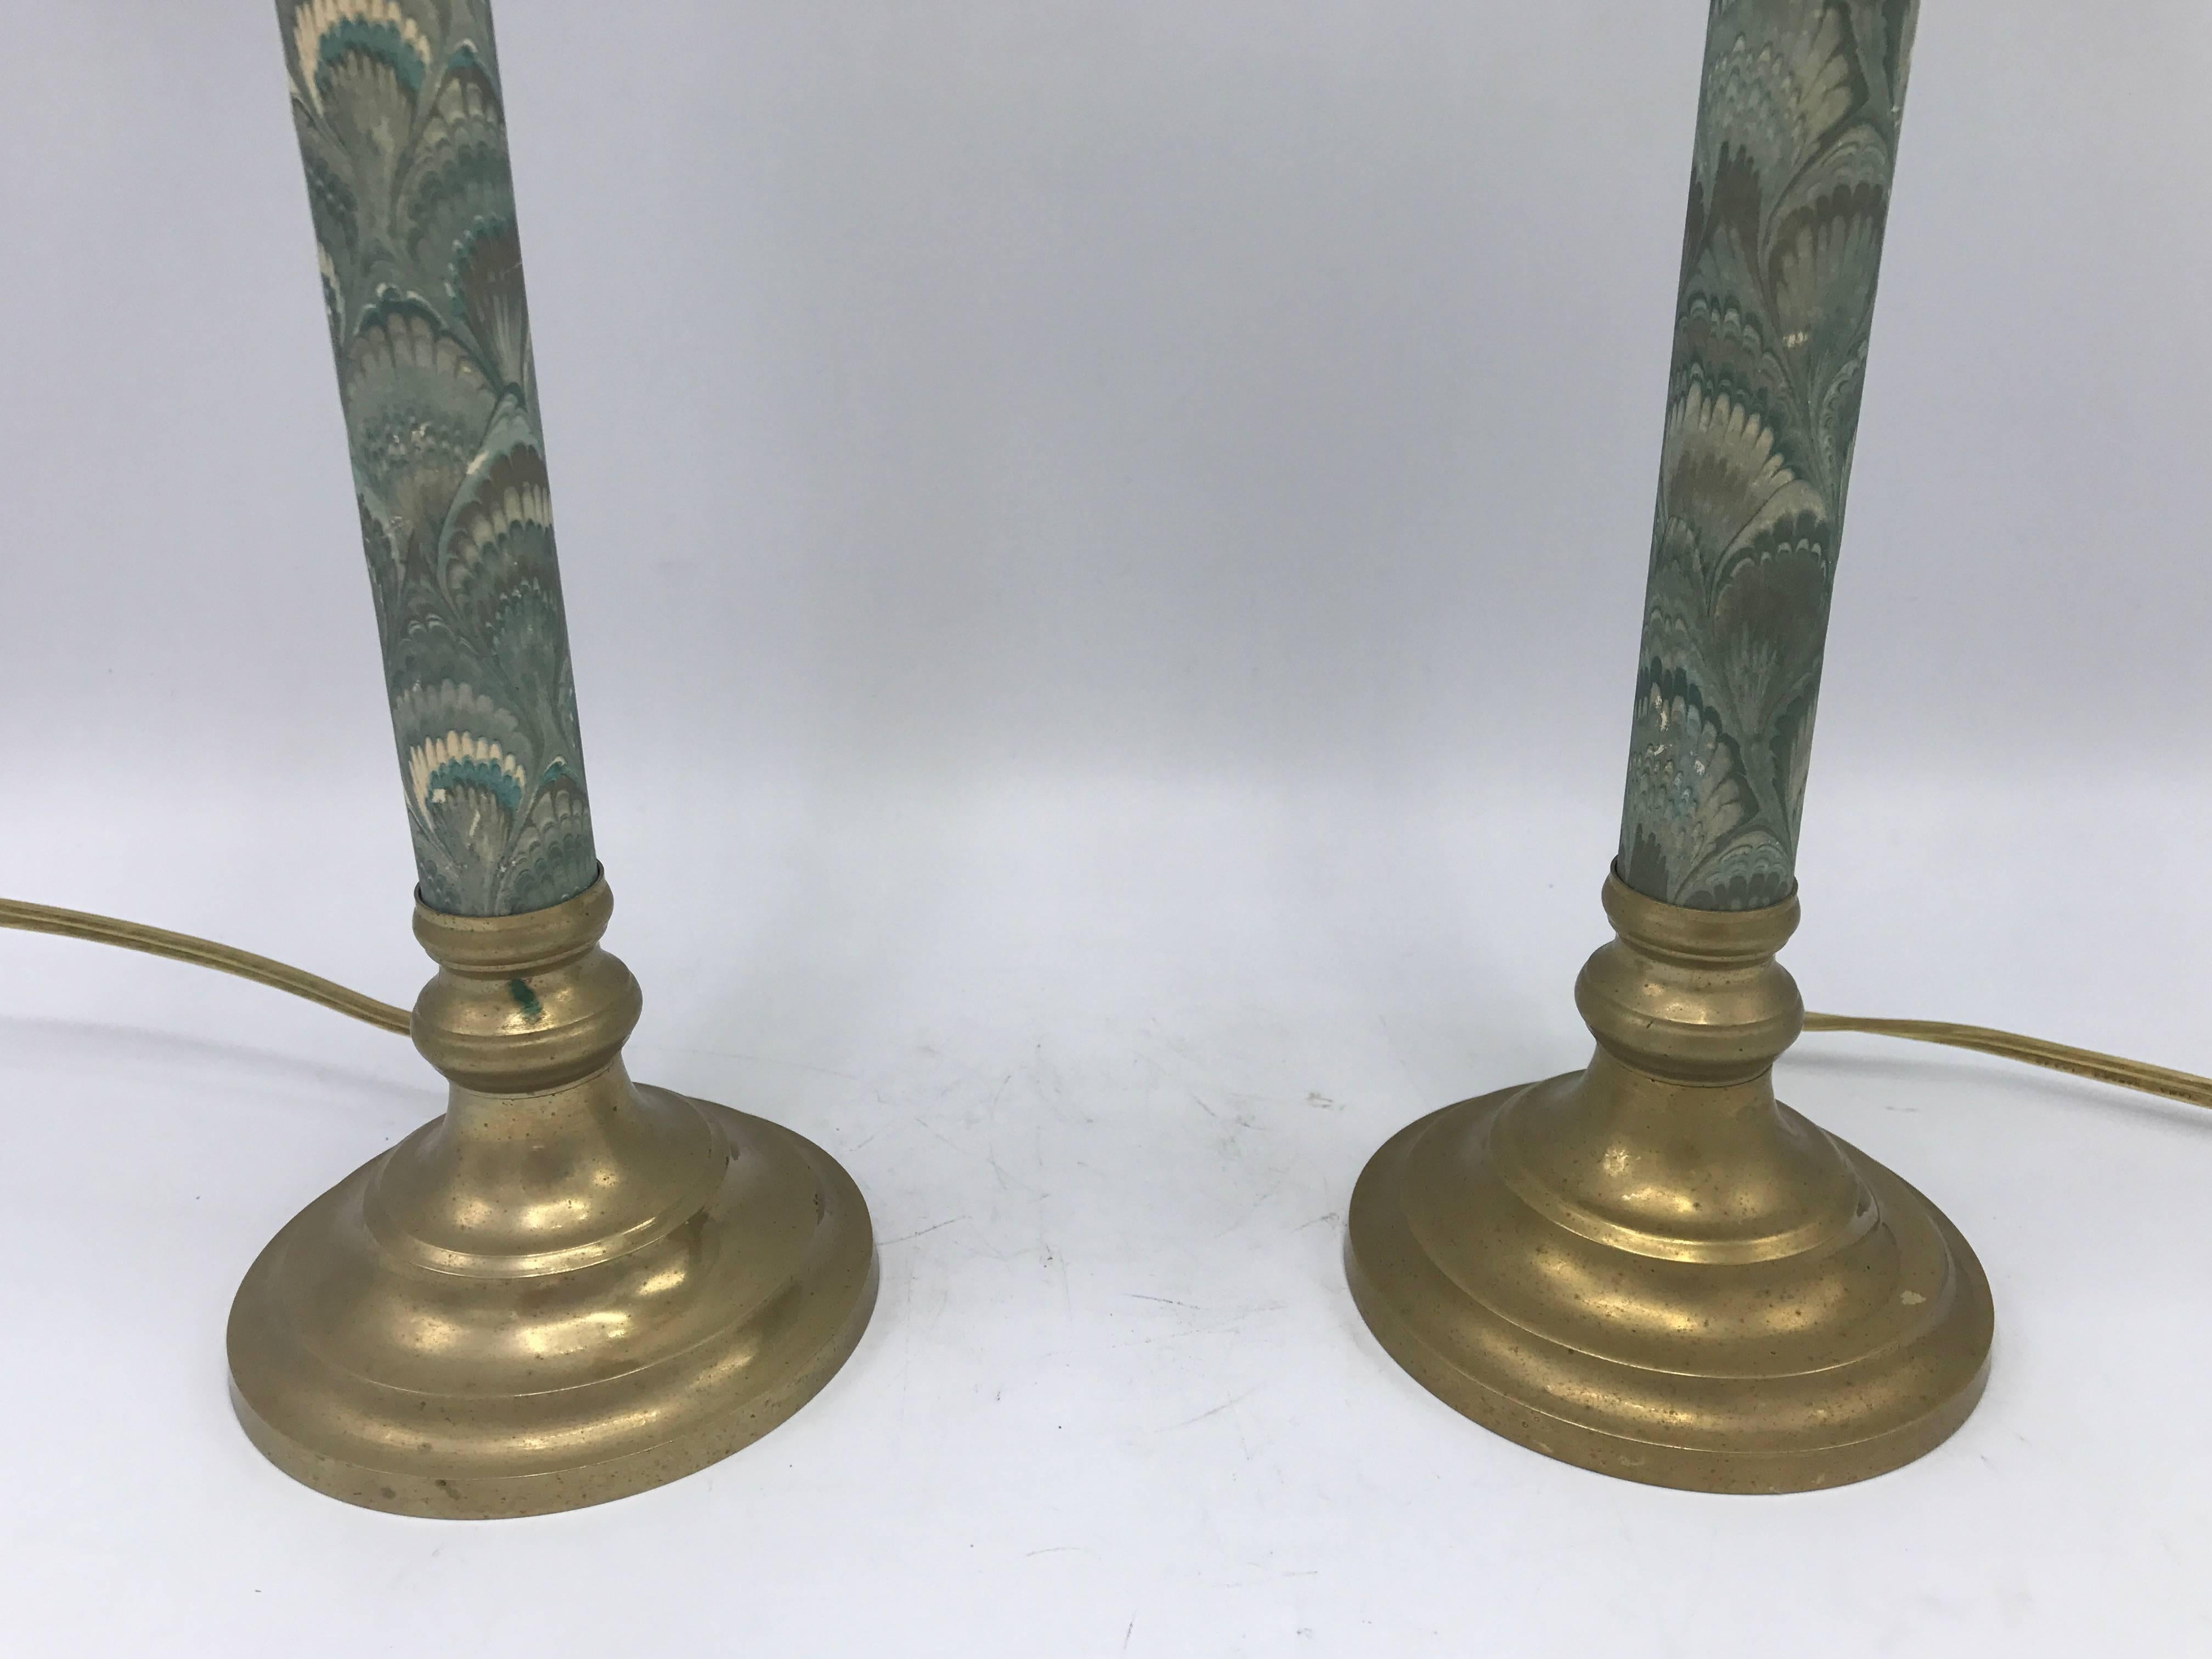 1950s Blue-Green Candlestick Lamps with Matching Water-Print Shades, Pair 1